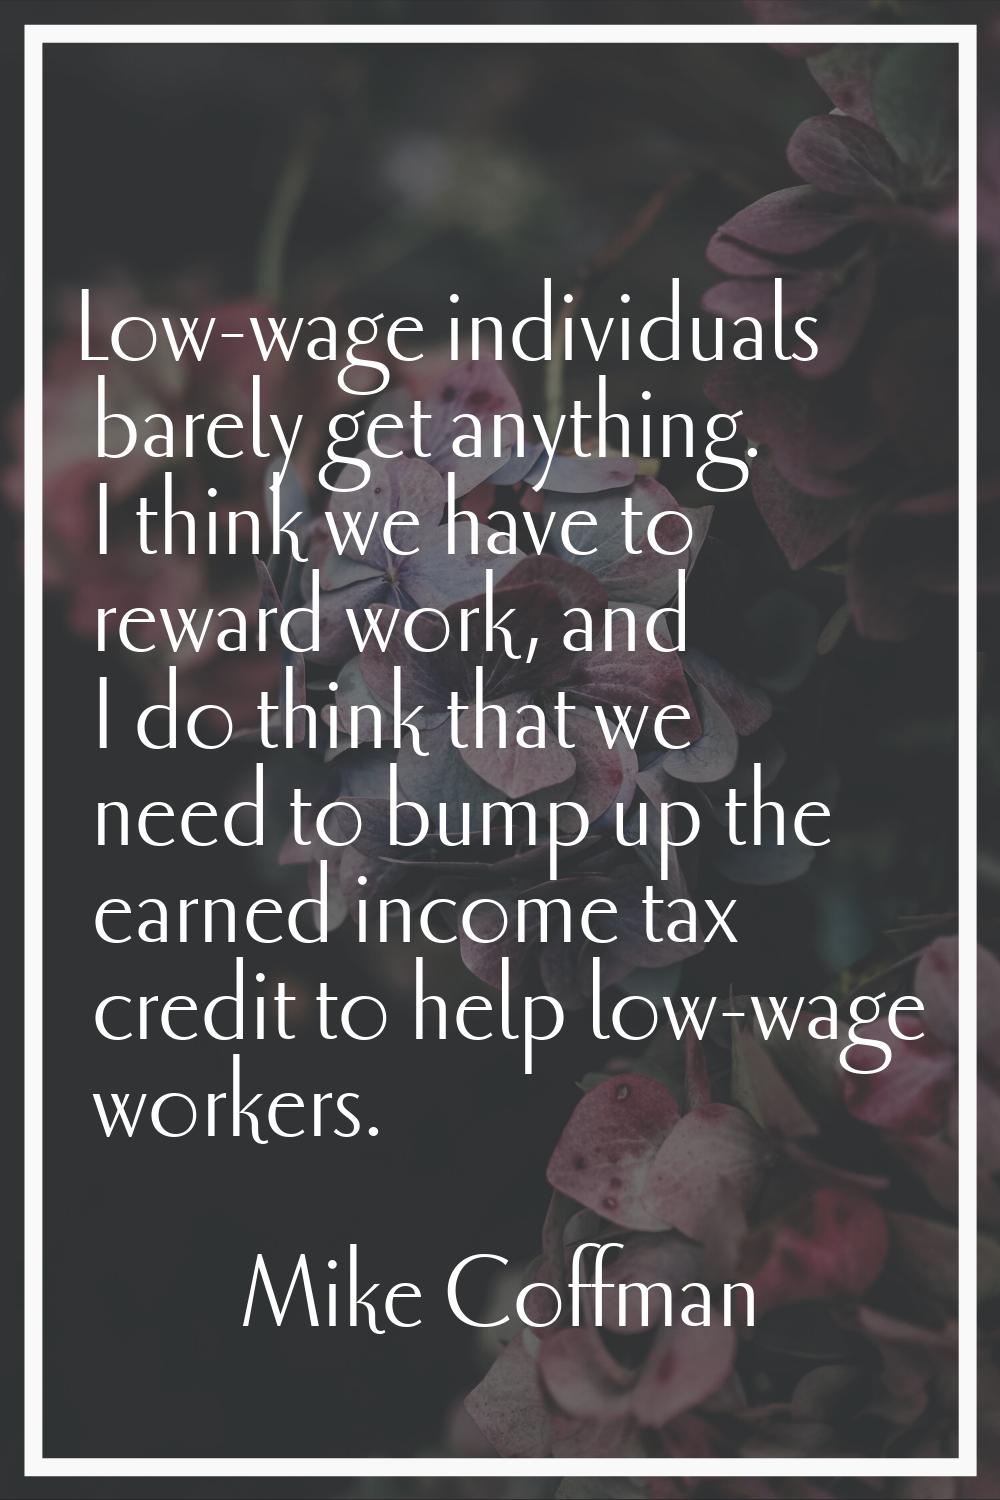 Low-wage individuals barely get anything. I think we have to reward work, and I do think that we ne